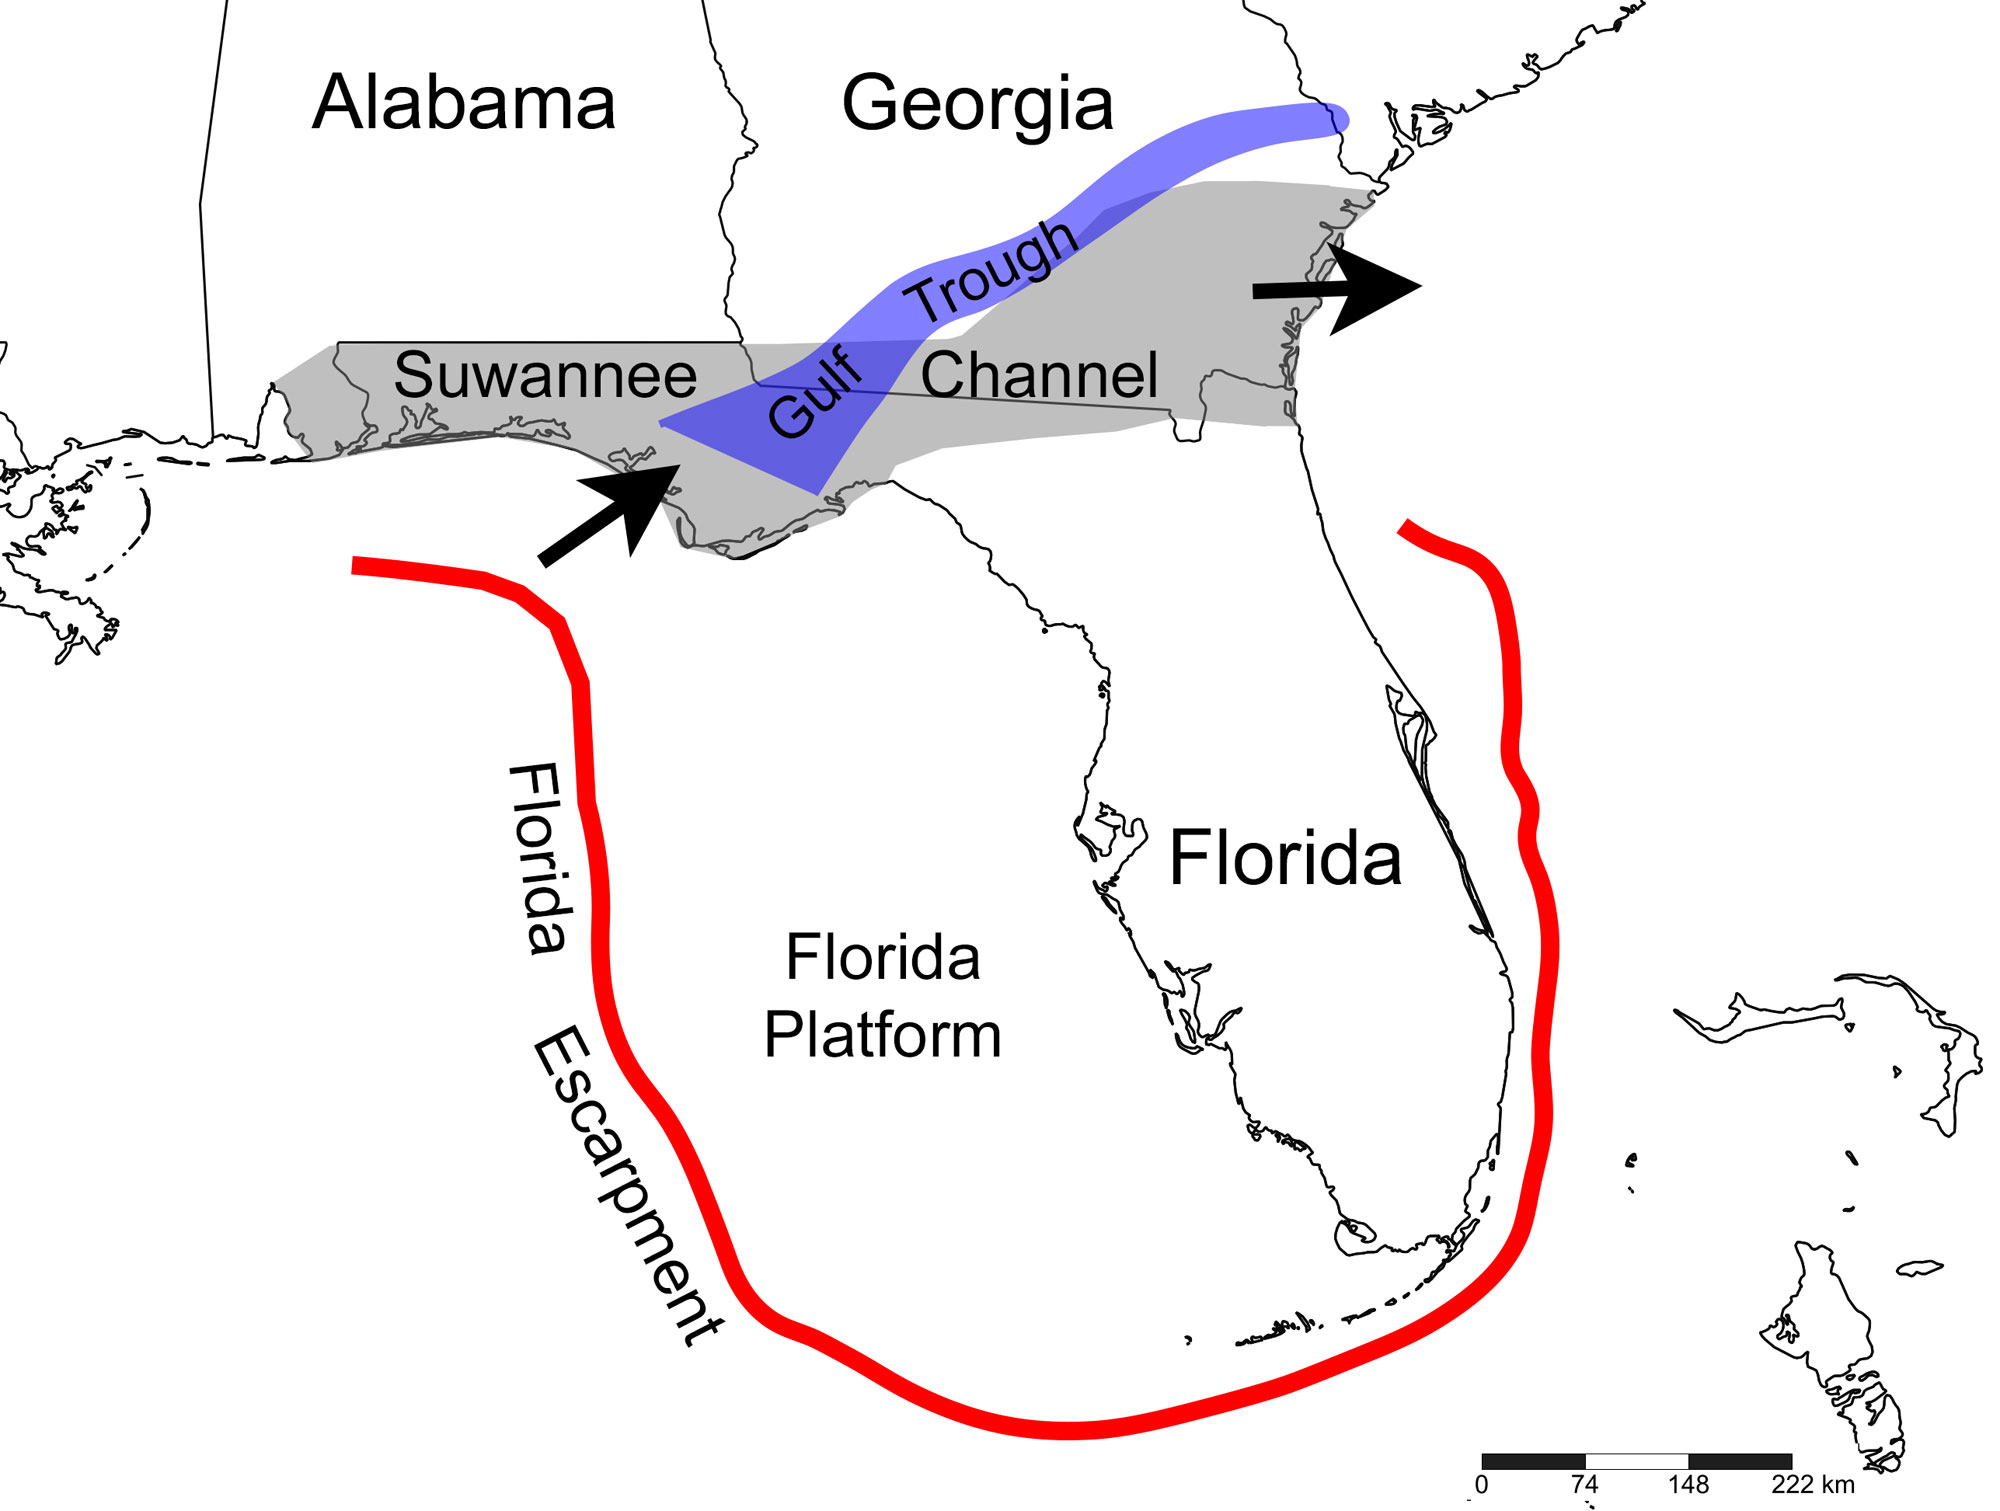 Map showing the locations of the Suwannee Channel and the Gulf Trough in Florida.